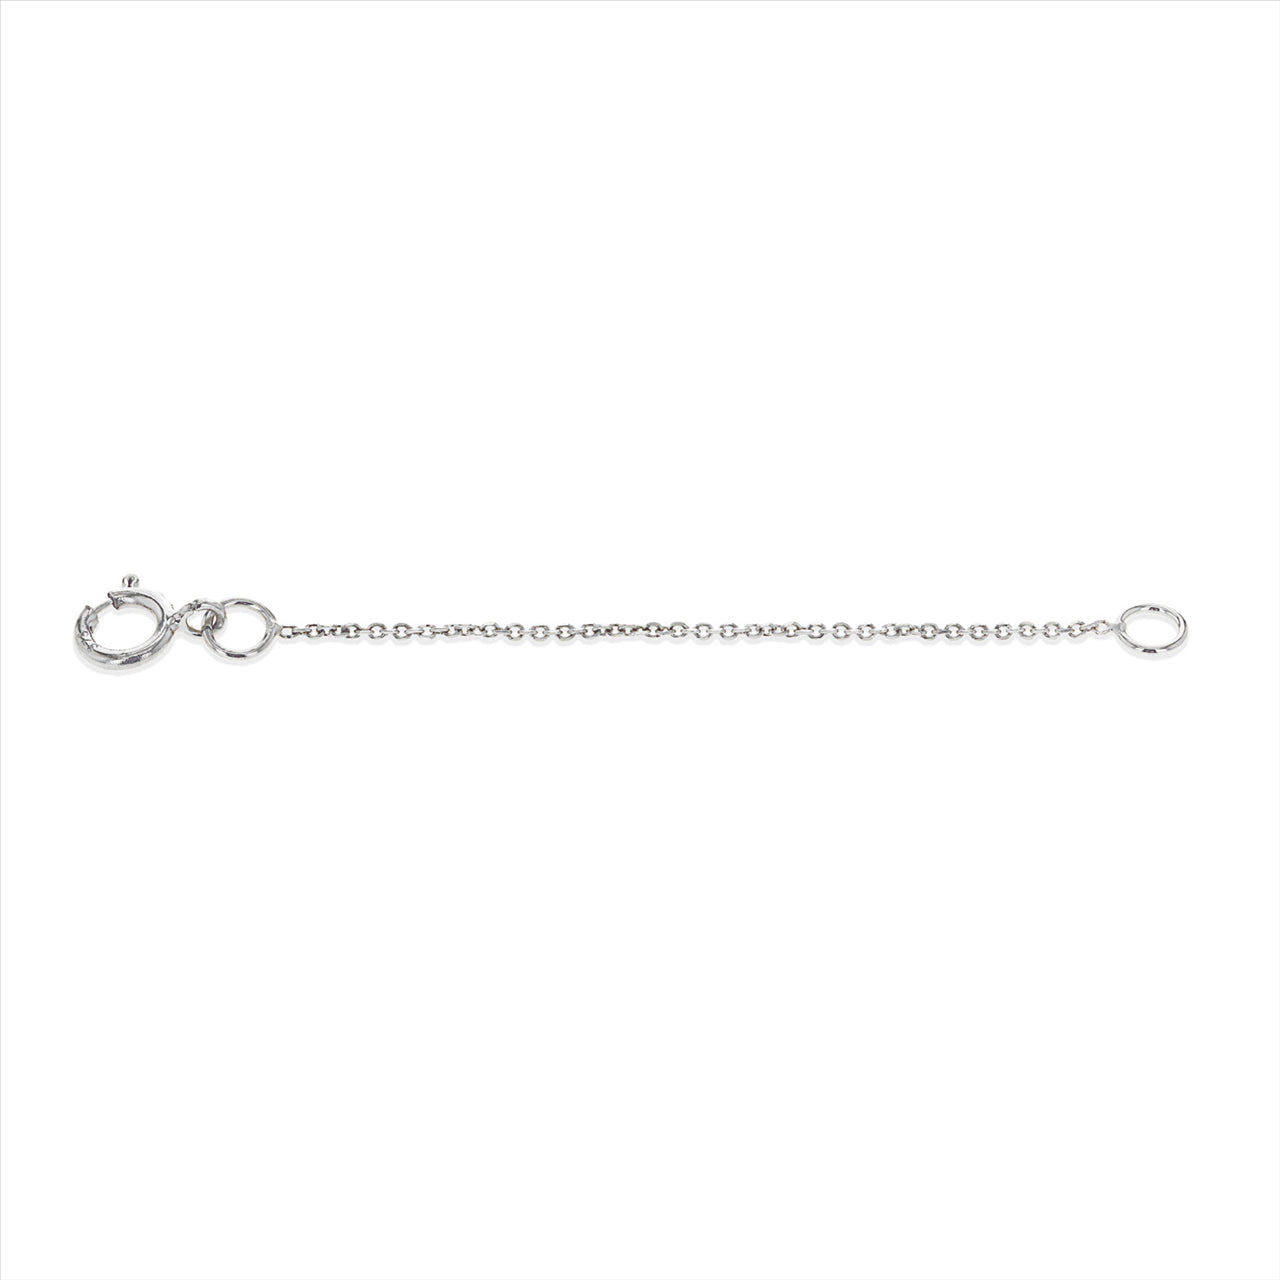 9ct White Gold 5cm chain extension.